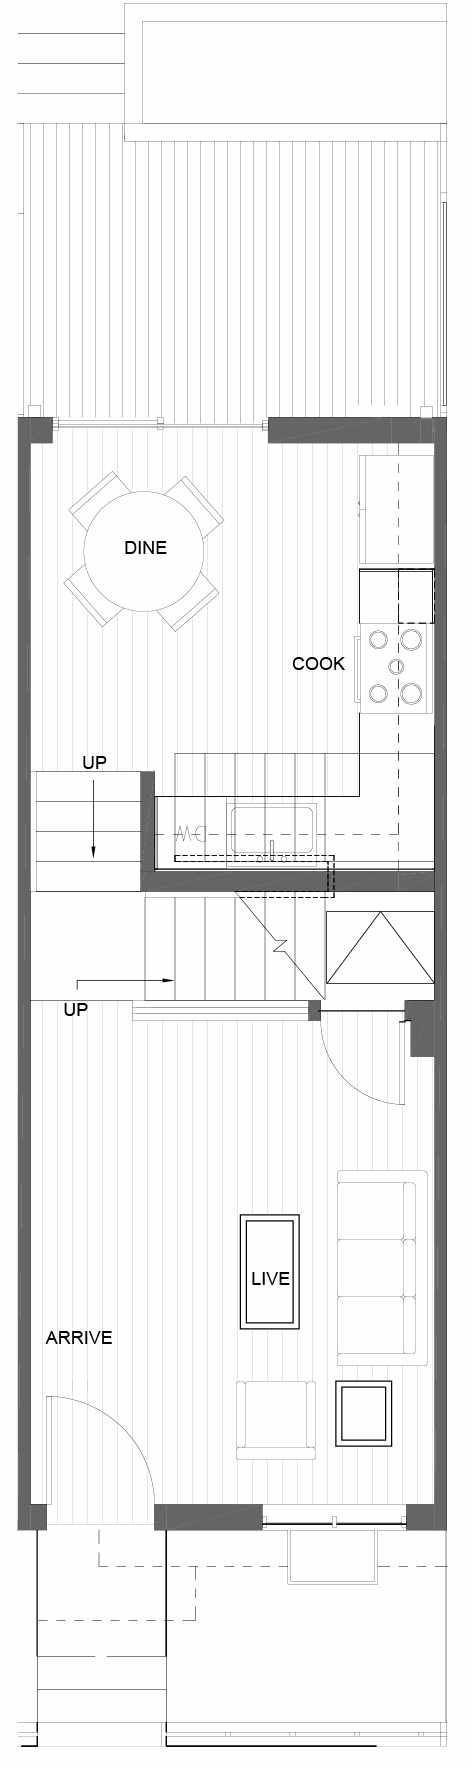 First Floor Plan of 3015C 30th Ave W, One of the Lochlan Townhomes by Isola Homes in Magnolia